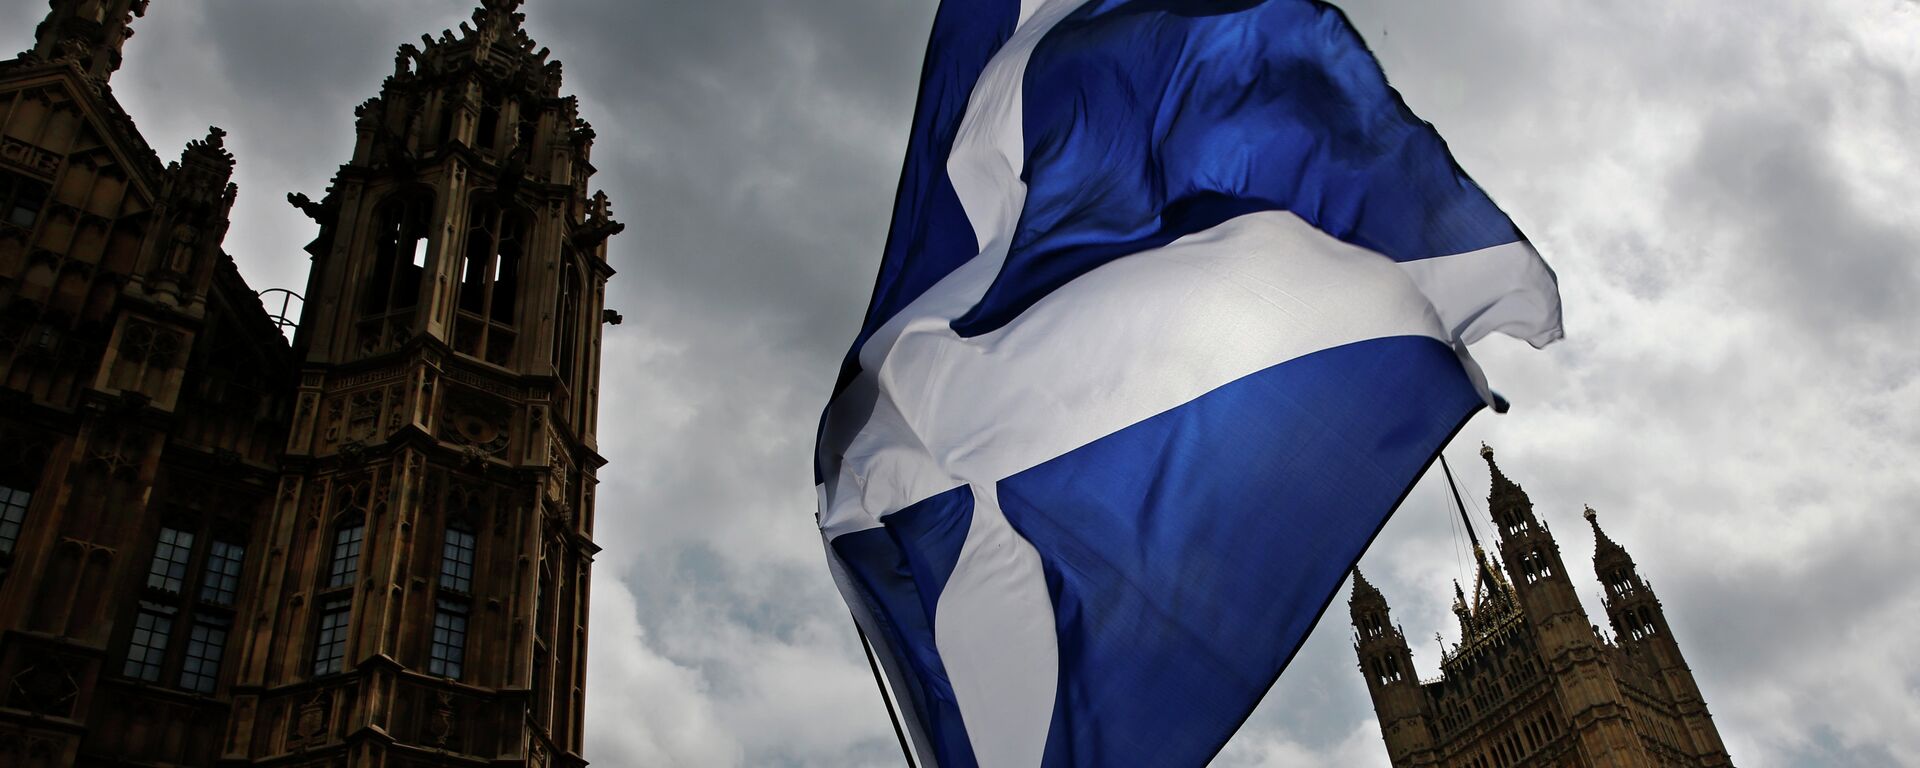 A member of public flies a giant Scottish Saltire flag outside the Houses of Parliament shortly before Scotland First Minister Nicola Sturgeon posed with newly-elected Scottish National Party (SNP) MPs during a photocall in London on May 11, 2015 - Sputnik Mundo, 1920, 30.03.2021